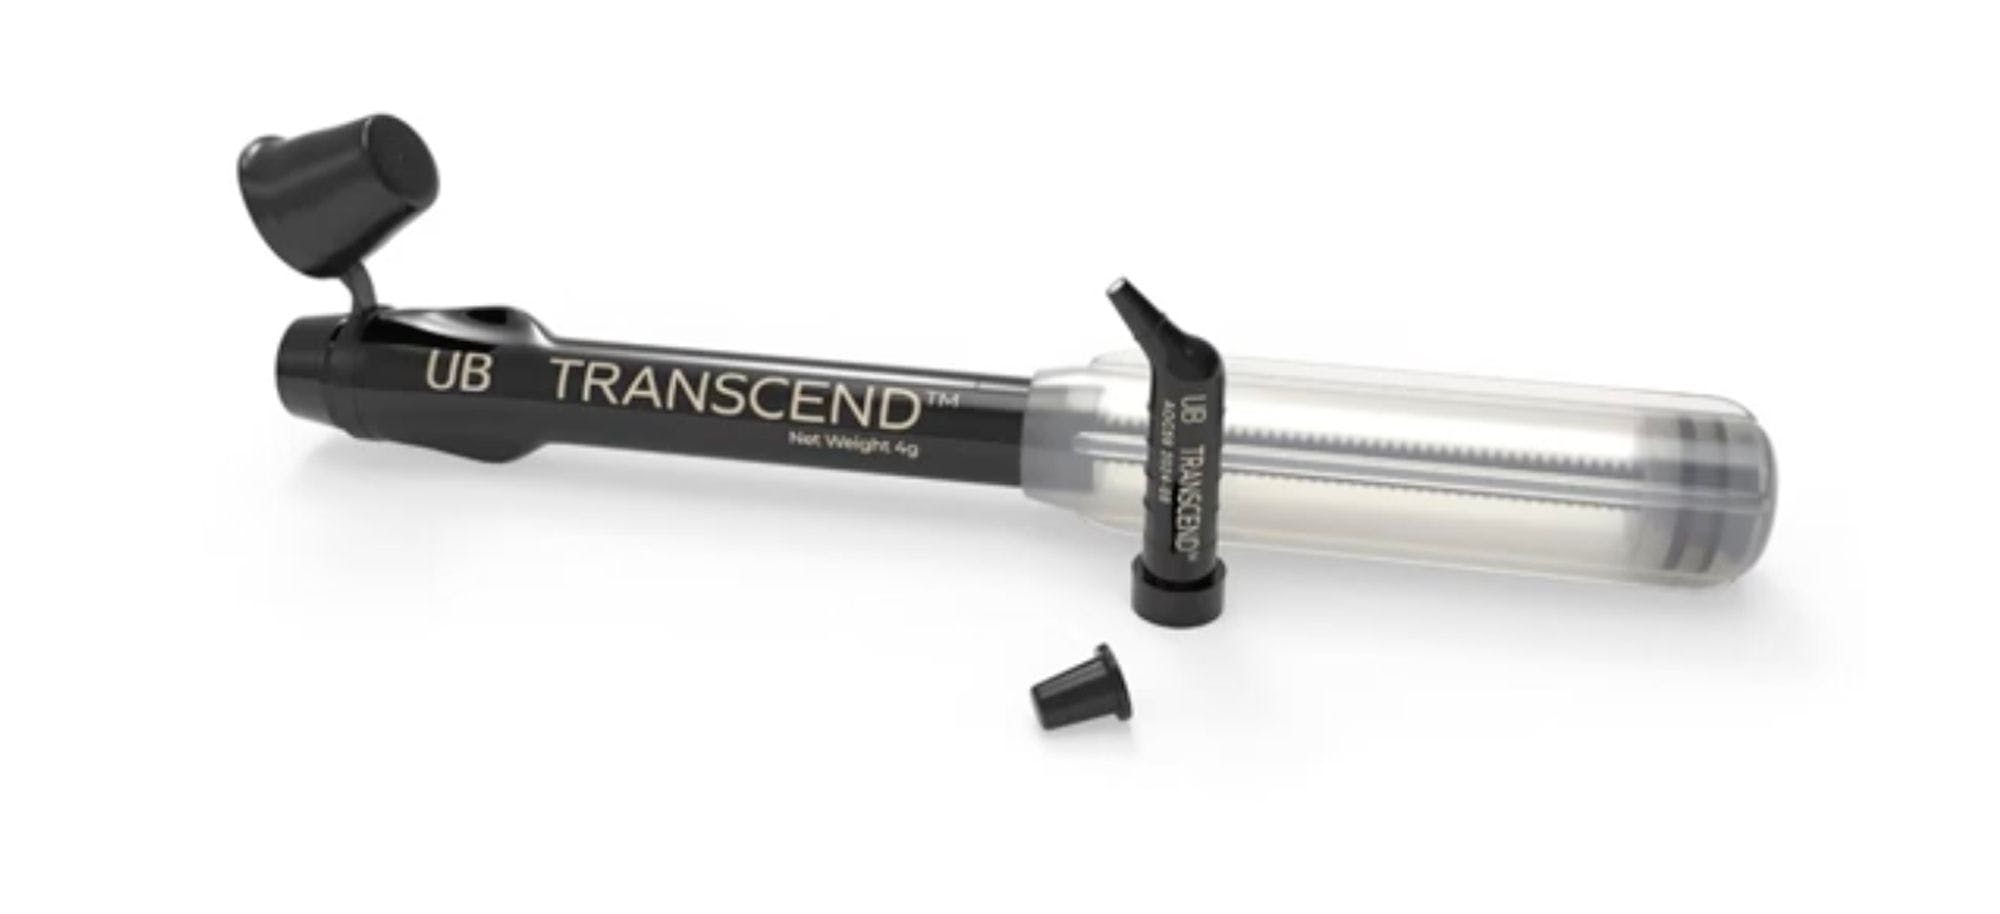 Transcend from Ultradent. Image: © Ultradent Products, Inc. 